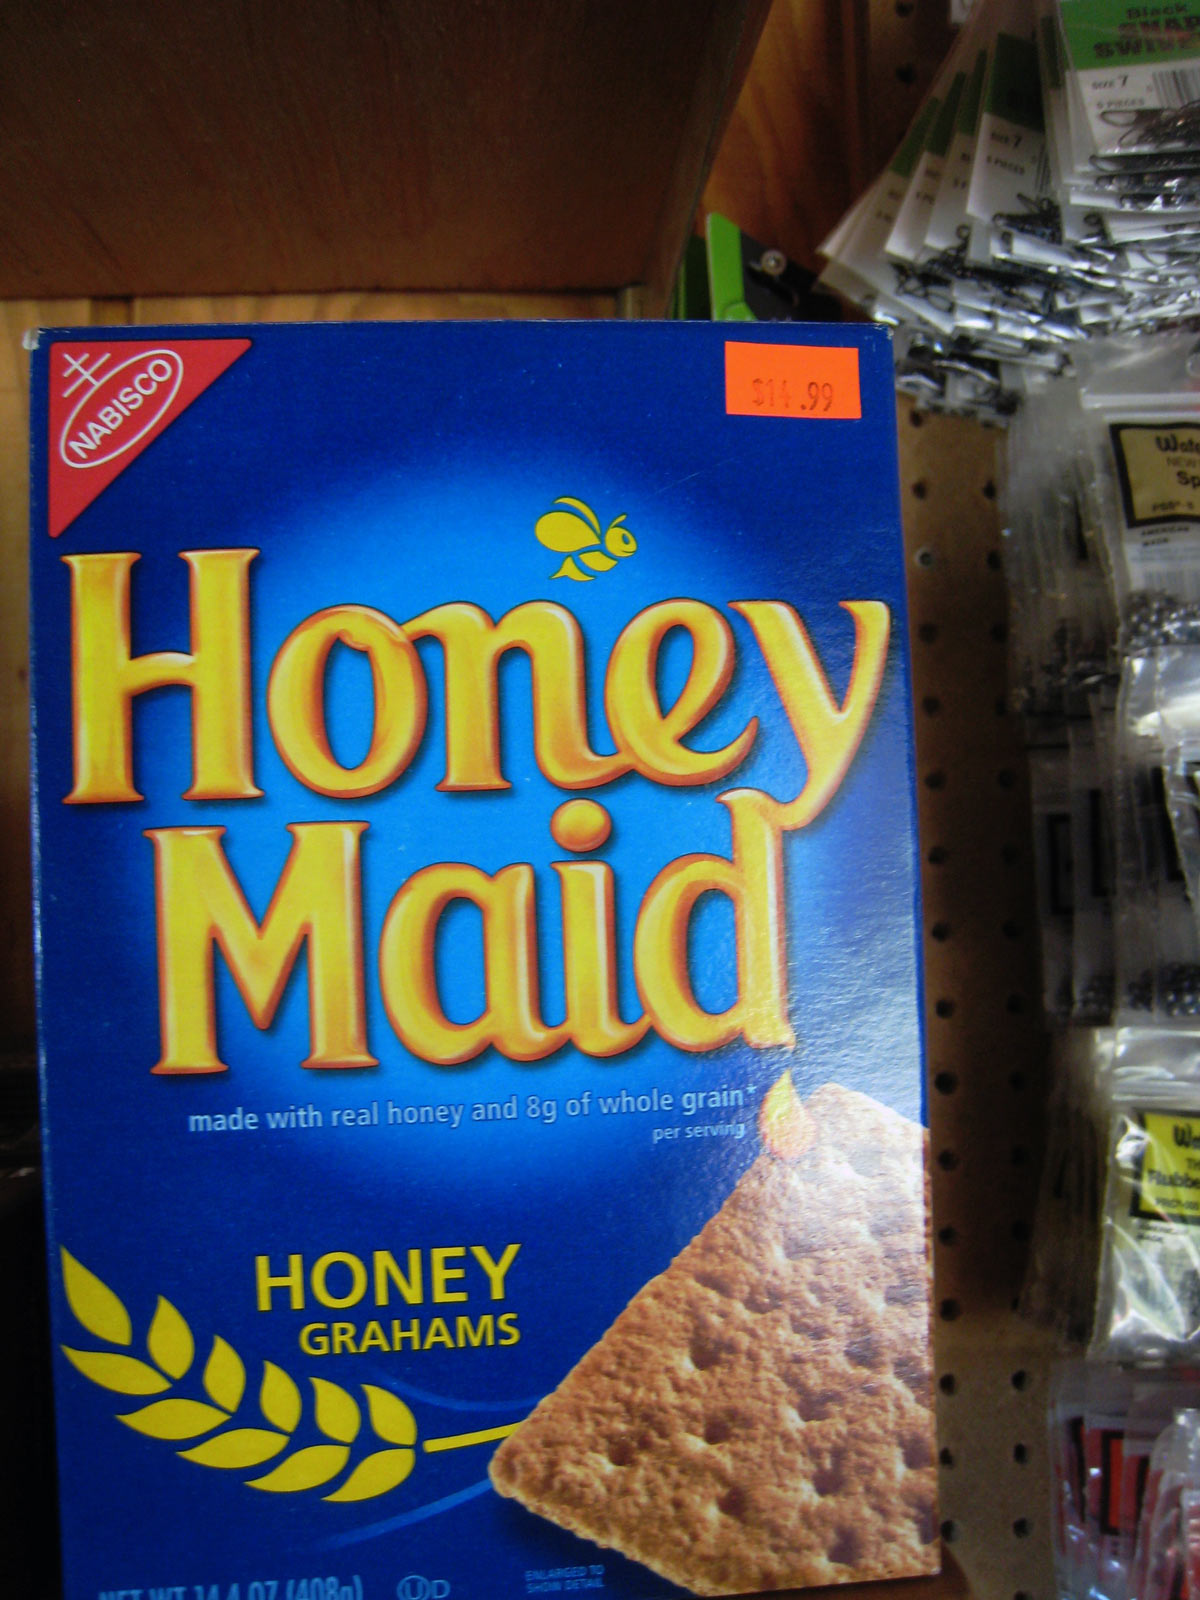 box of honey maid crackers with price tag of $14.99.